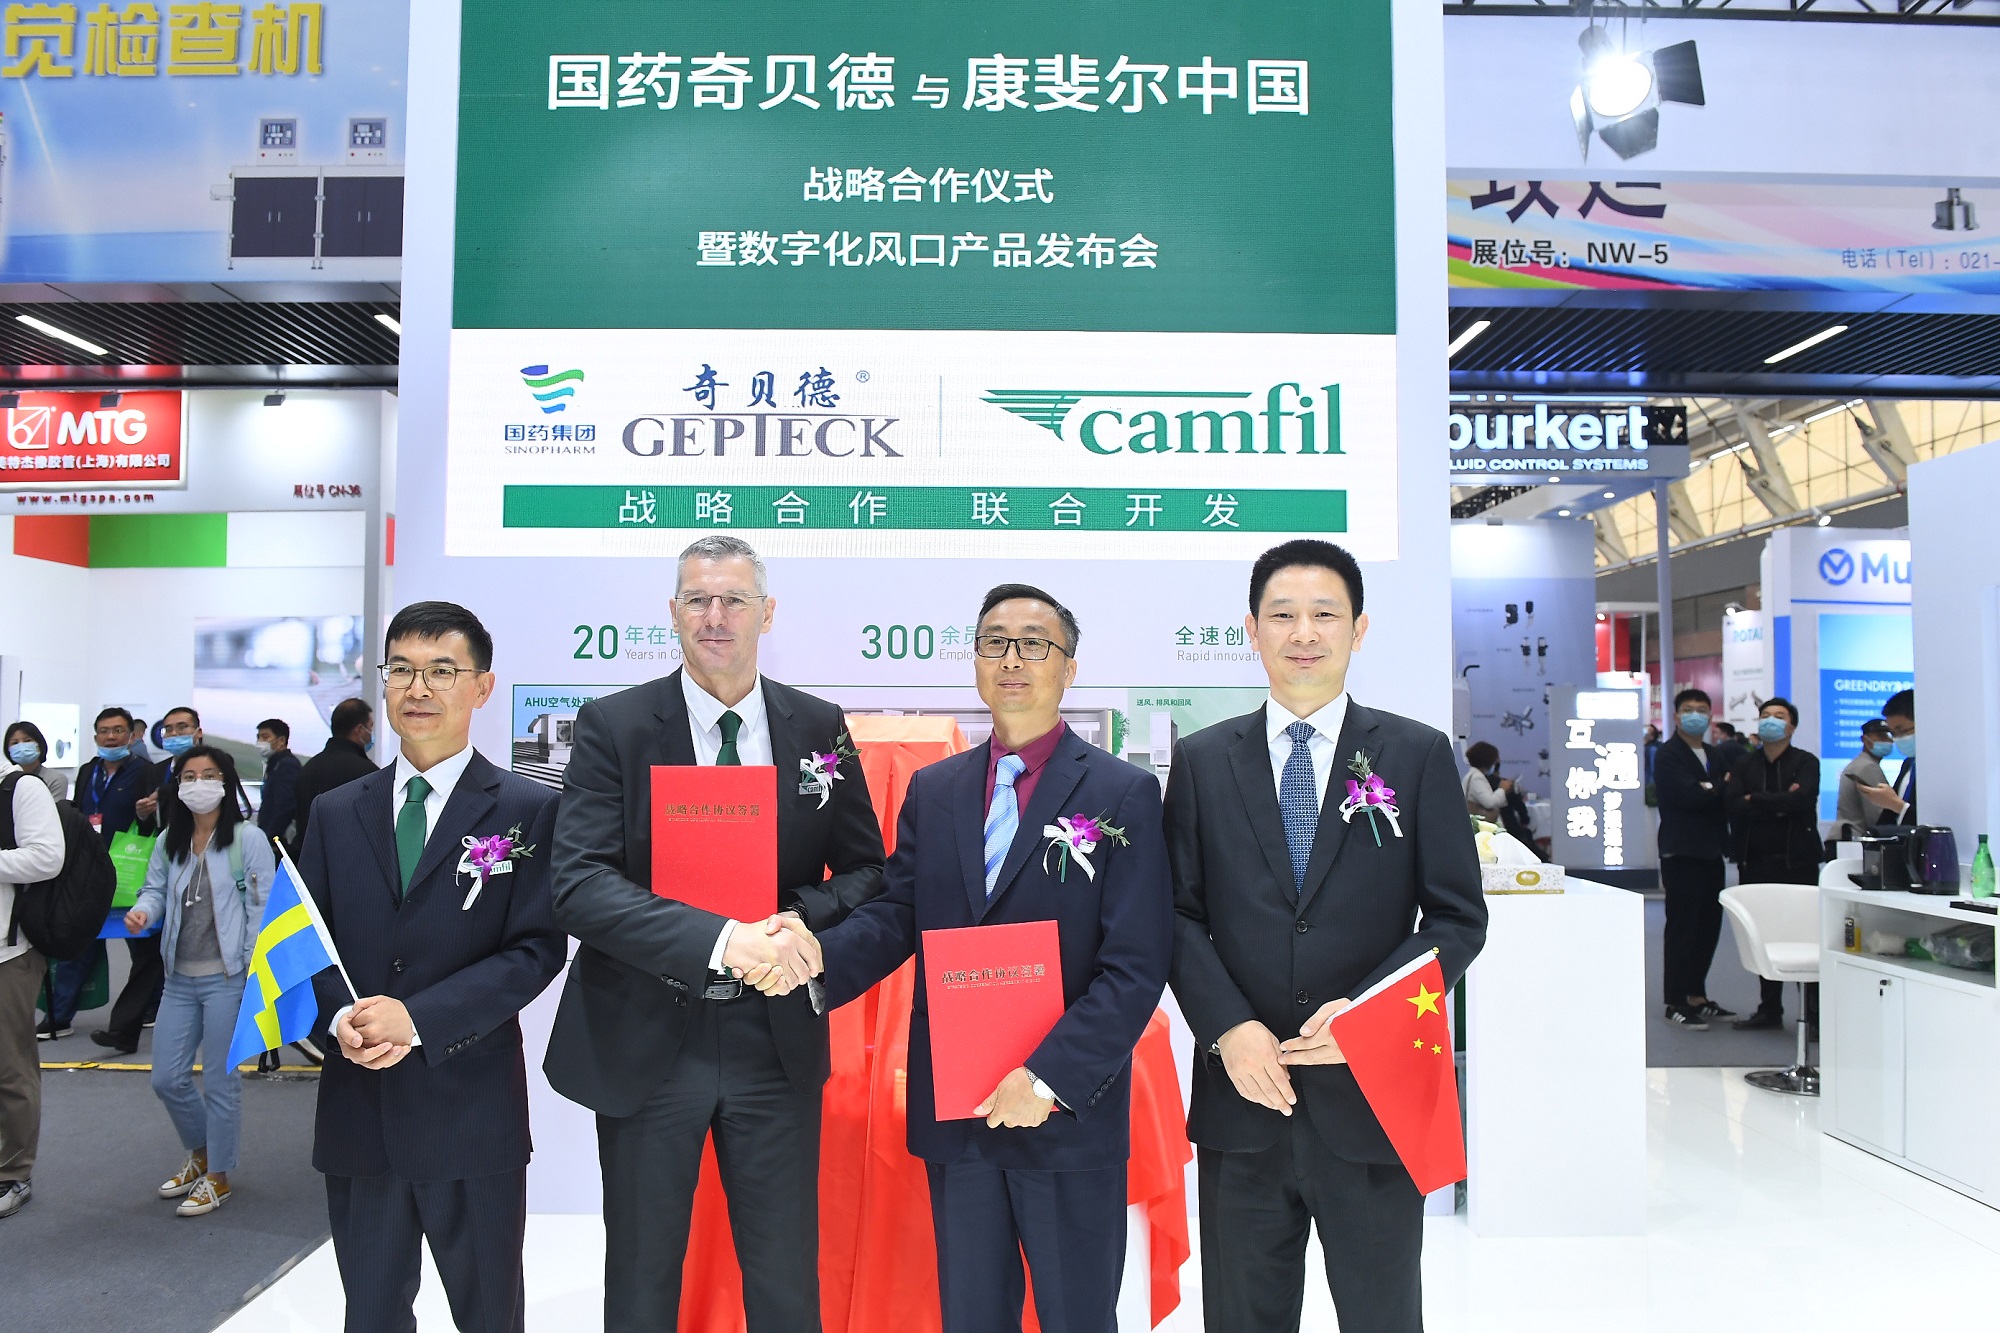 From left: Bridge Xu, senior sales director, Filter Business of Camfil Group China, Michel Moulin, managing director of Camfil Group China, Wang Yunbao, general manager of Sinopharm GEPTECK, Wu Xuehong, chief technologist of Sinopharm GEPTECK.